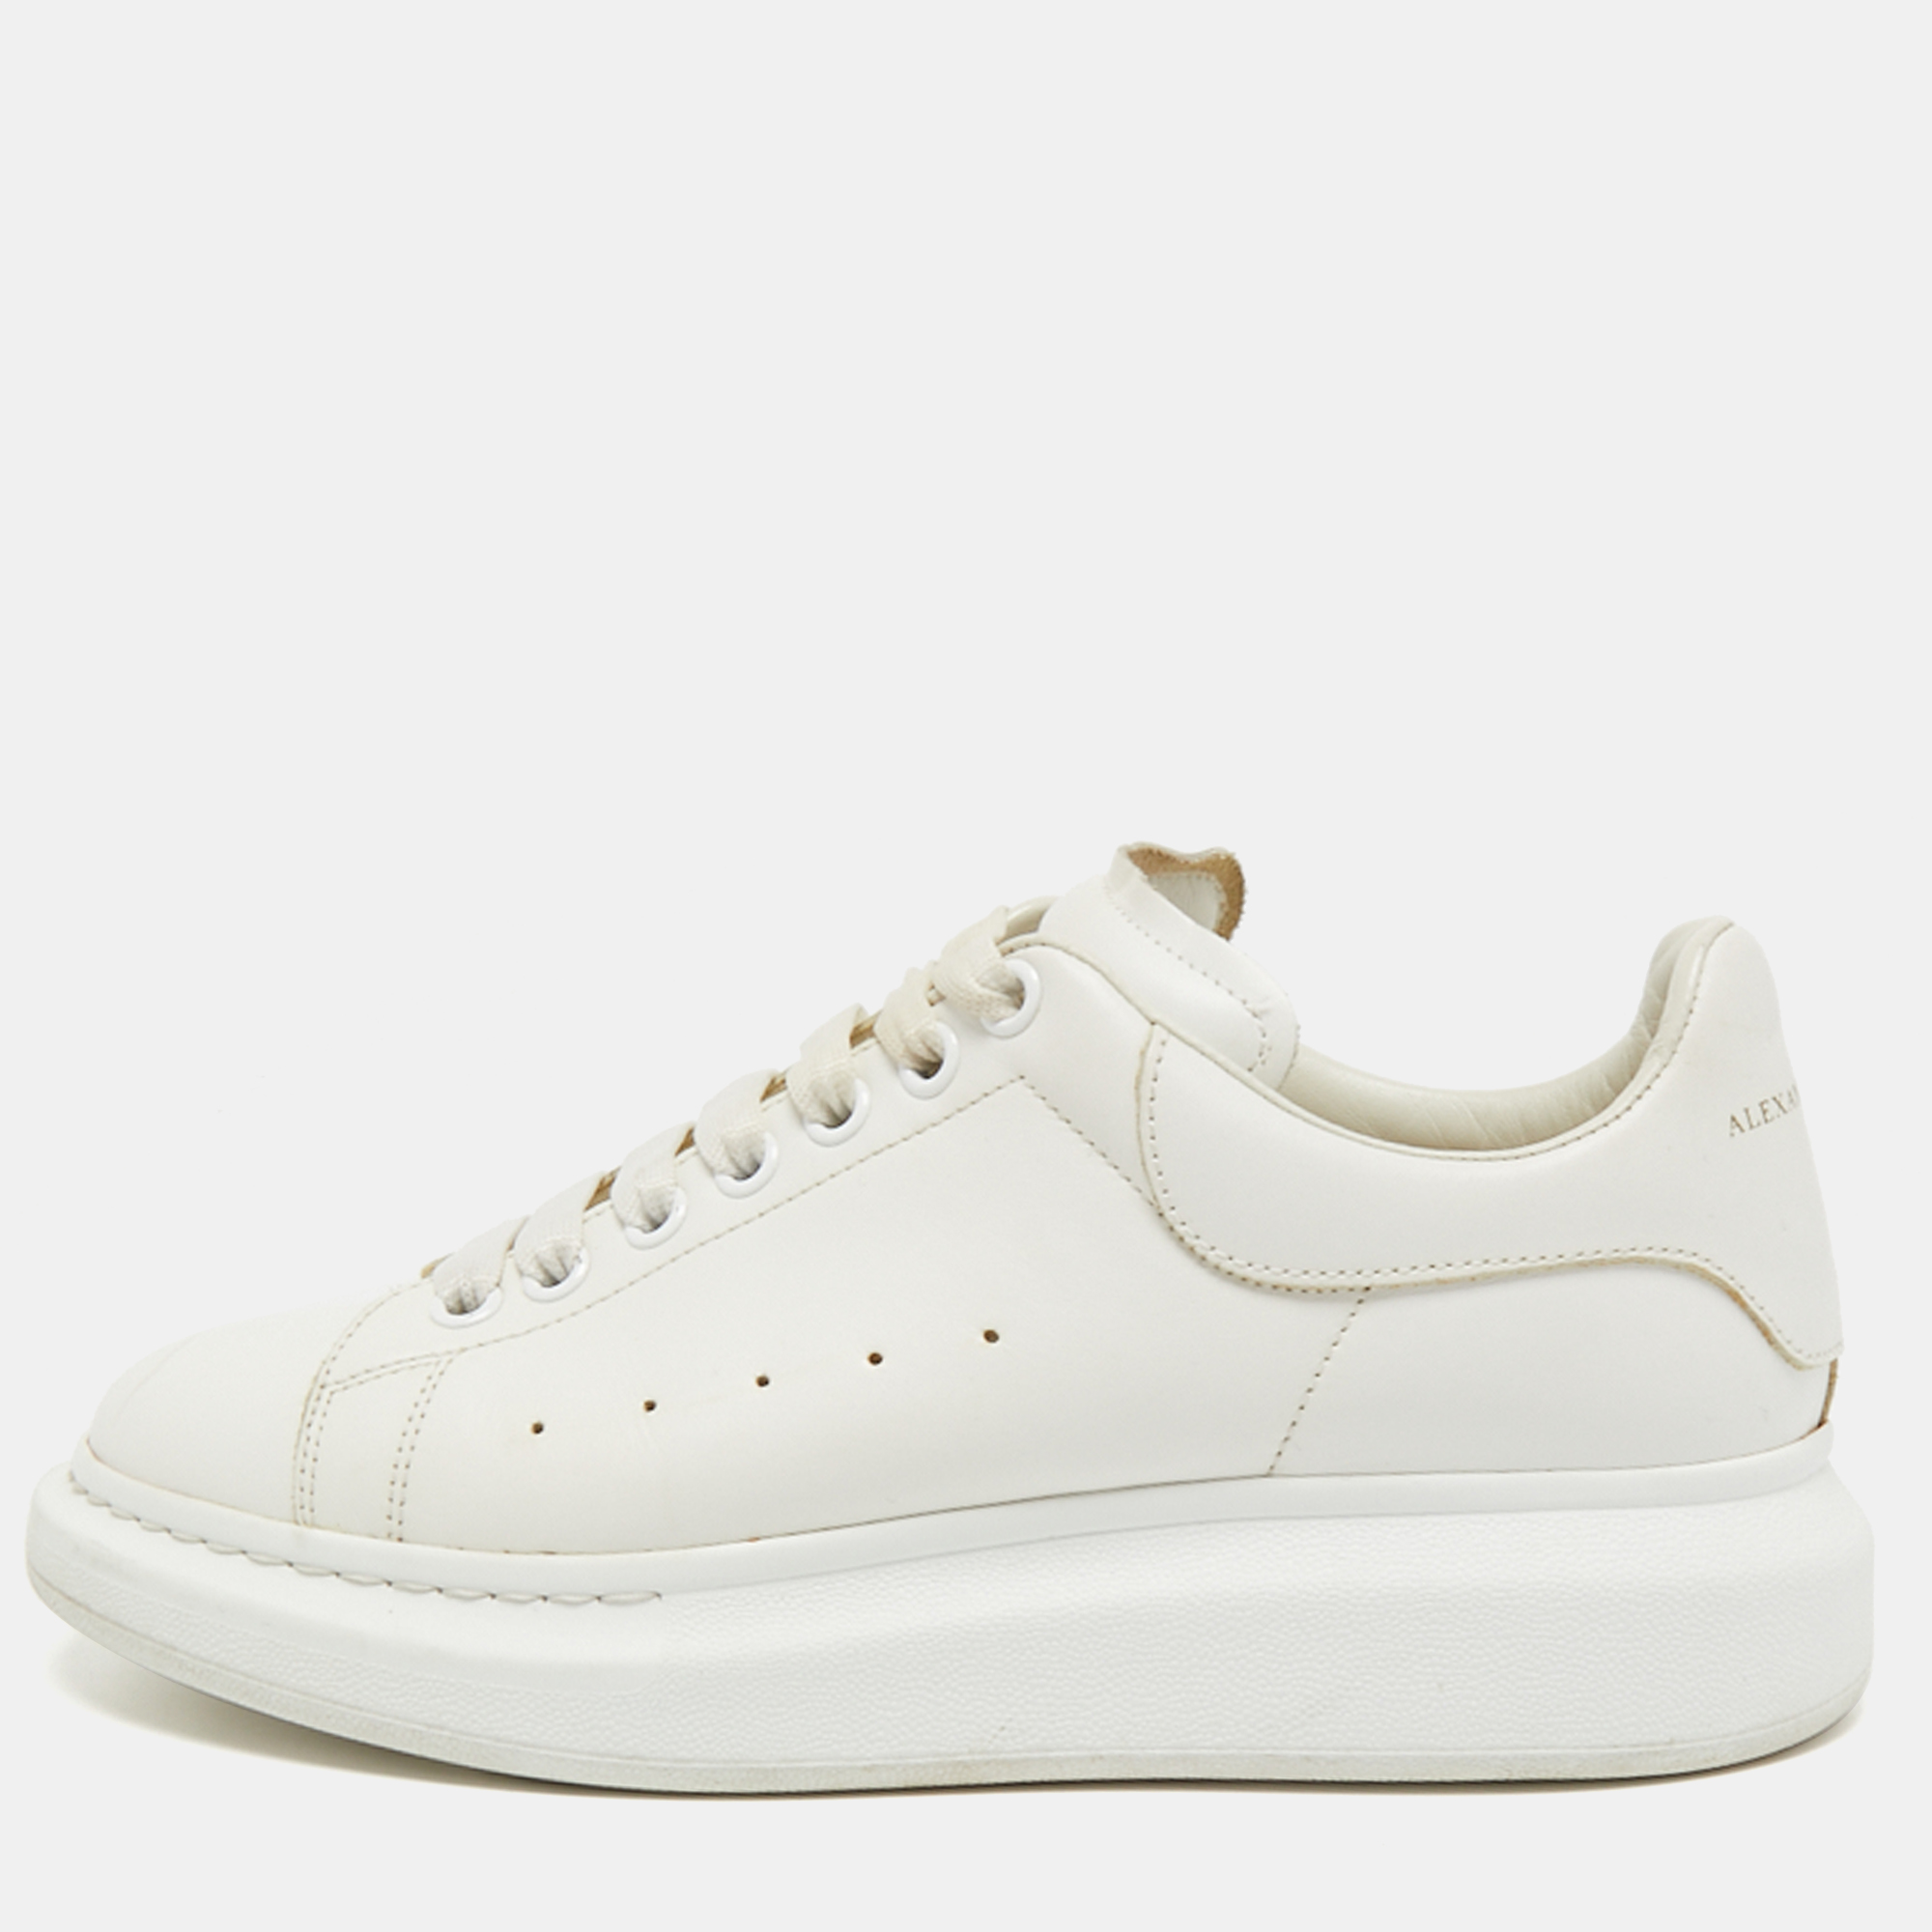 Pre-owned Alexander Mcqueen White Leather Oversized Sneakers Size 41